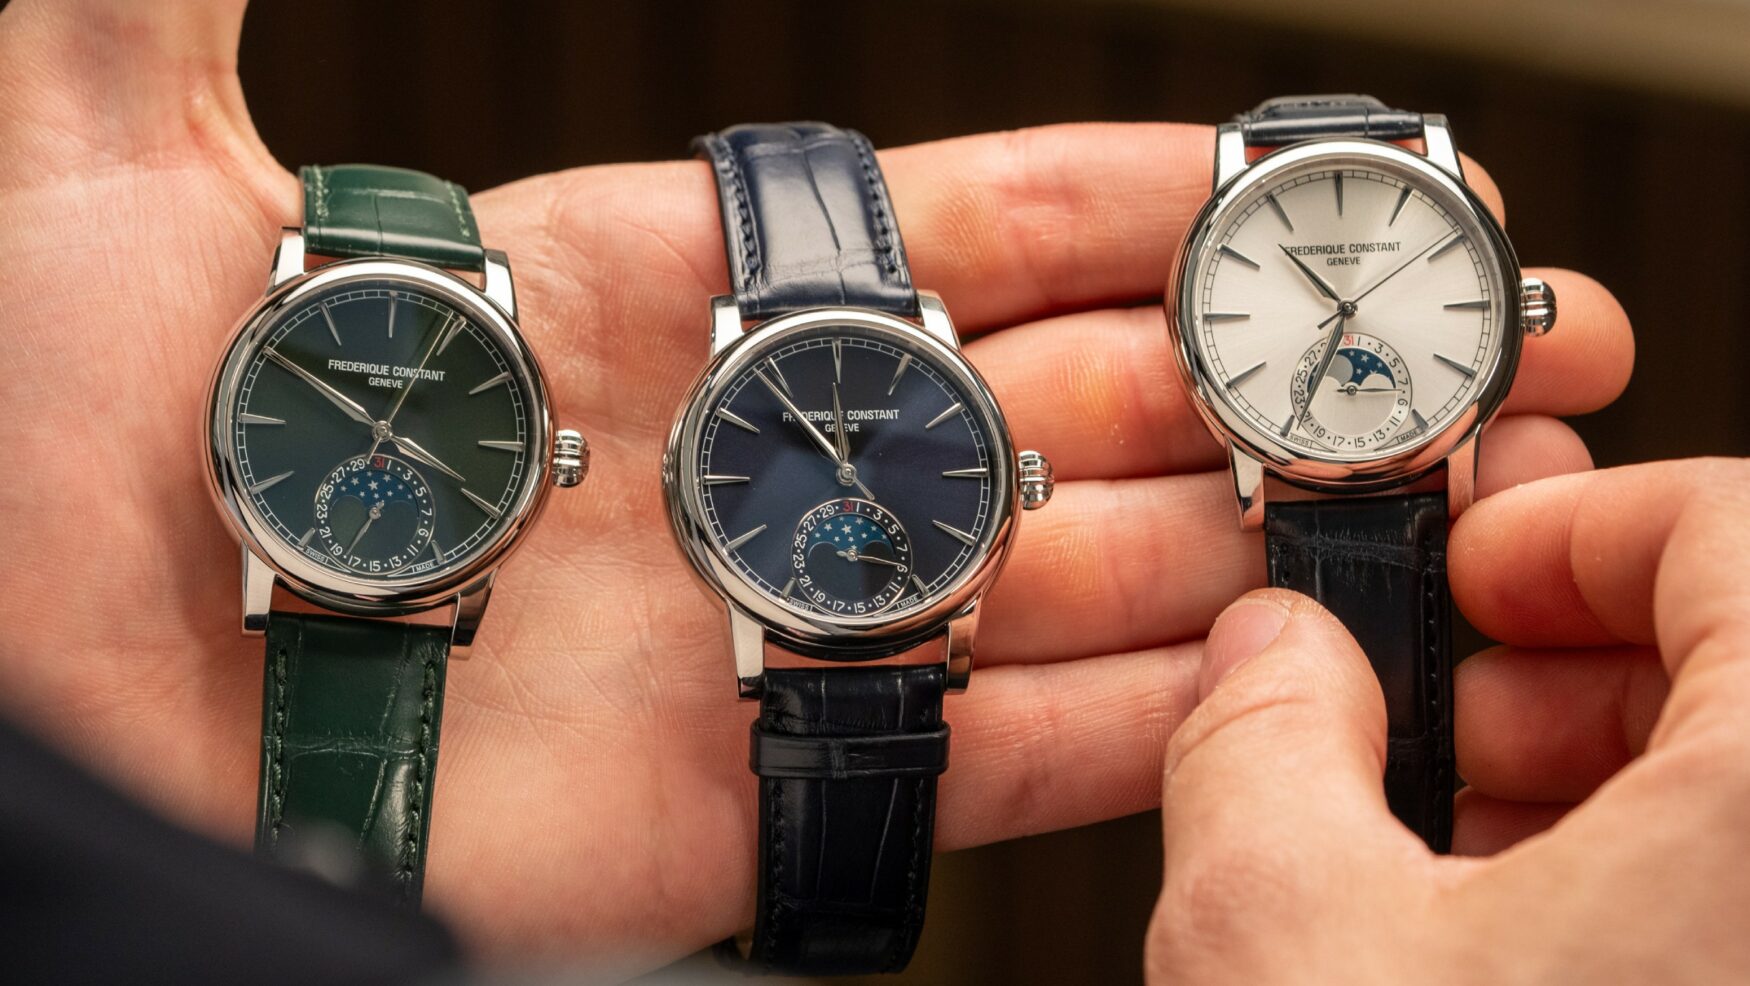 The Frederique Constant Moonphase Date Manufacture is packed with characterful, simple details